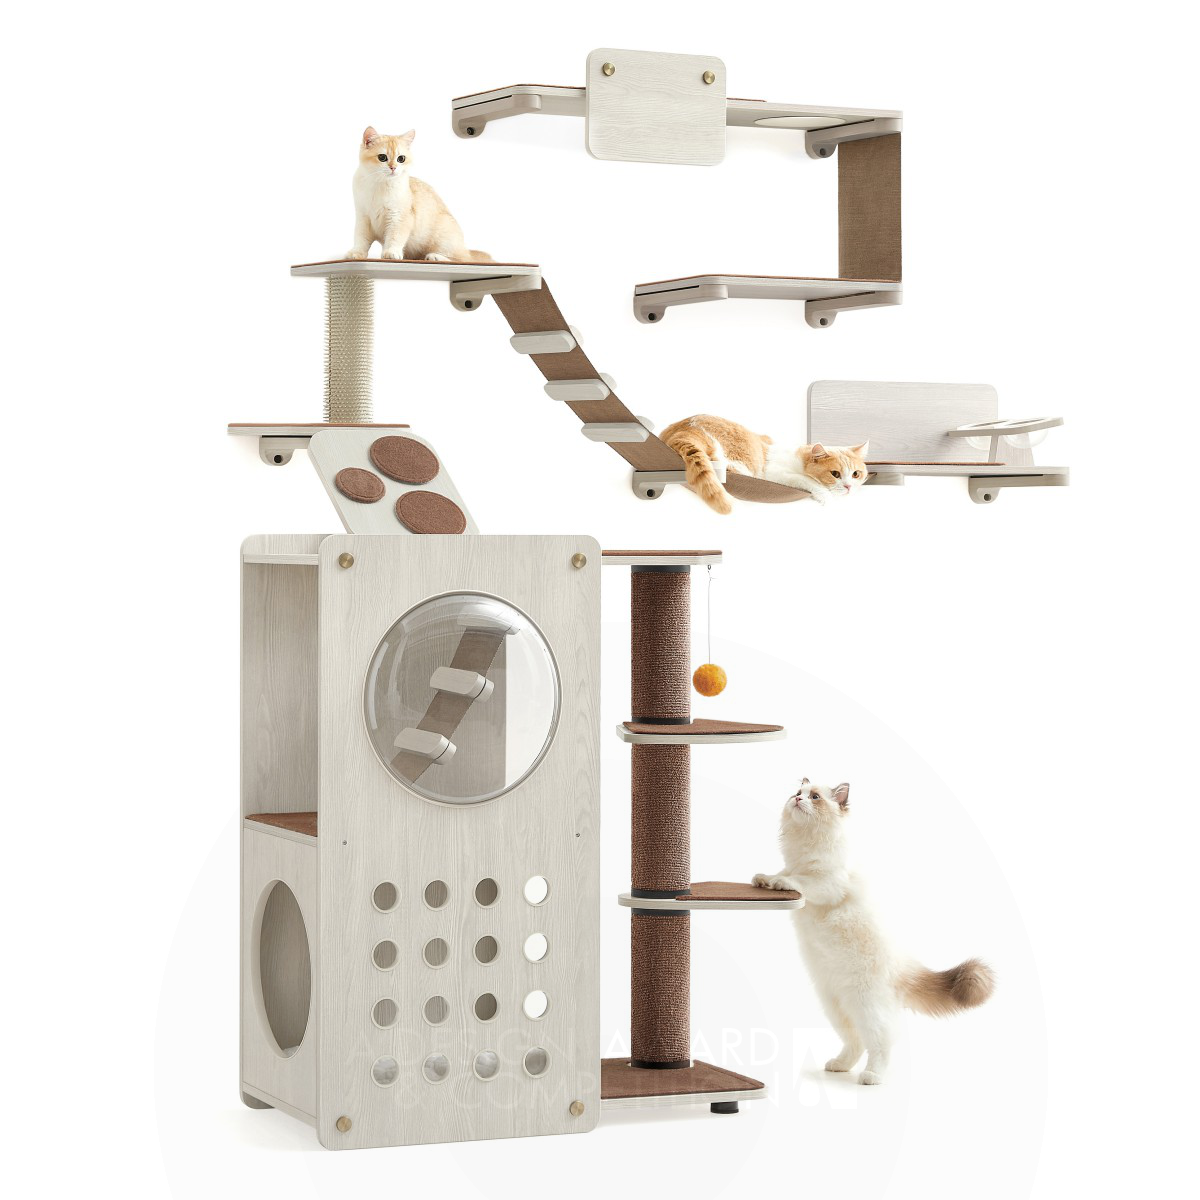 Ziel Home Furnishing Technology Co., Ltd wins Silver at the prestigious A' Pet Care, Toys, Supplies and Products for Animals Design Award with Clickat Diy Cat Furniture.